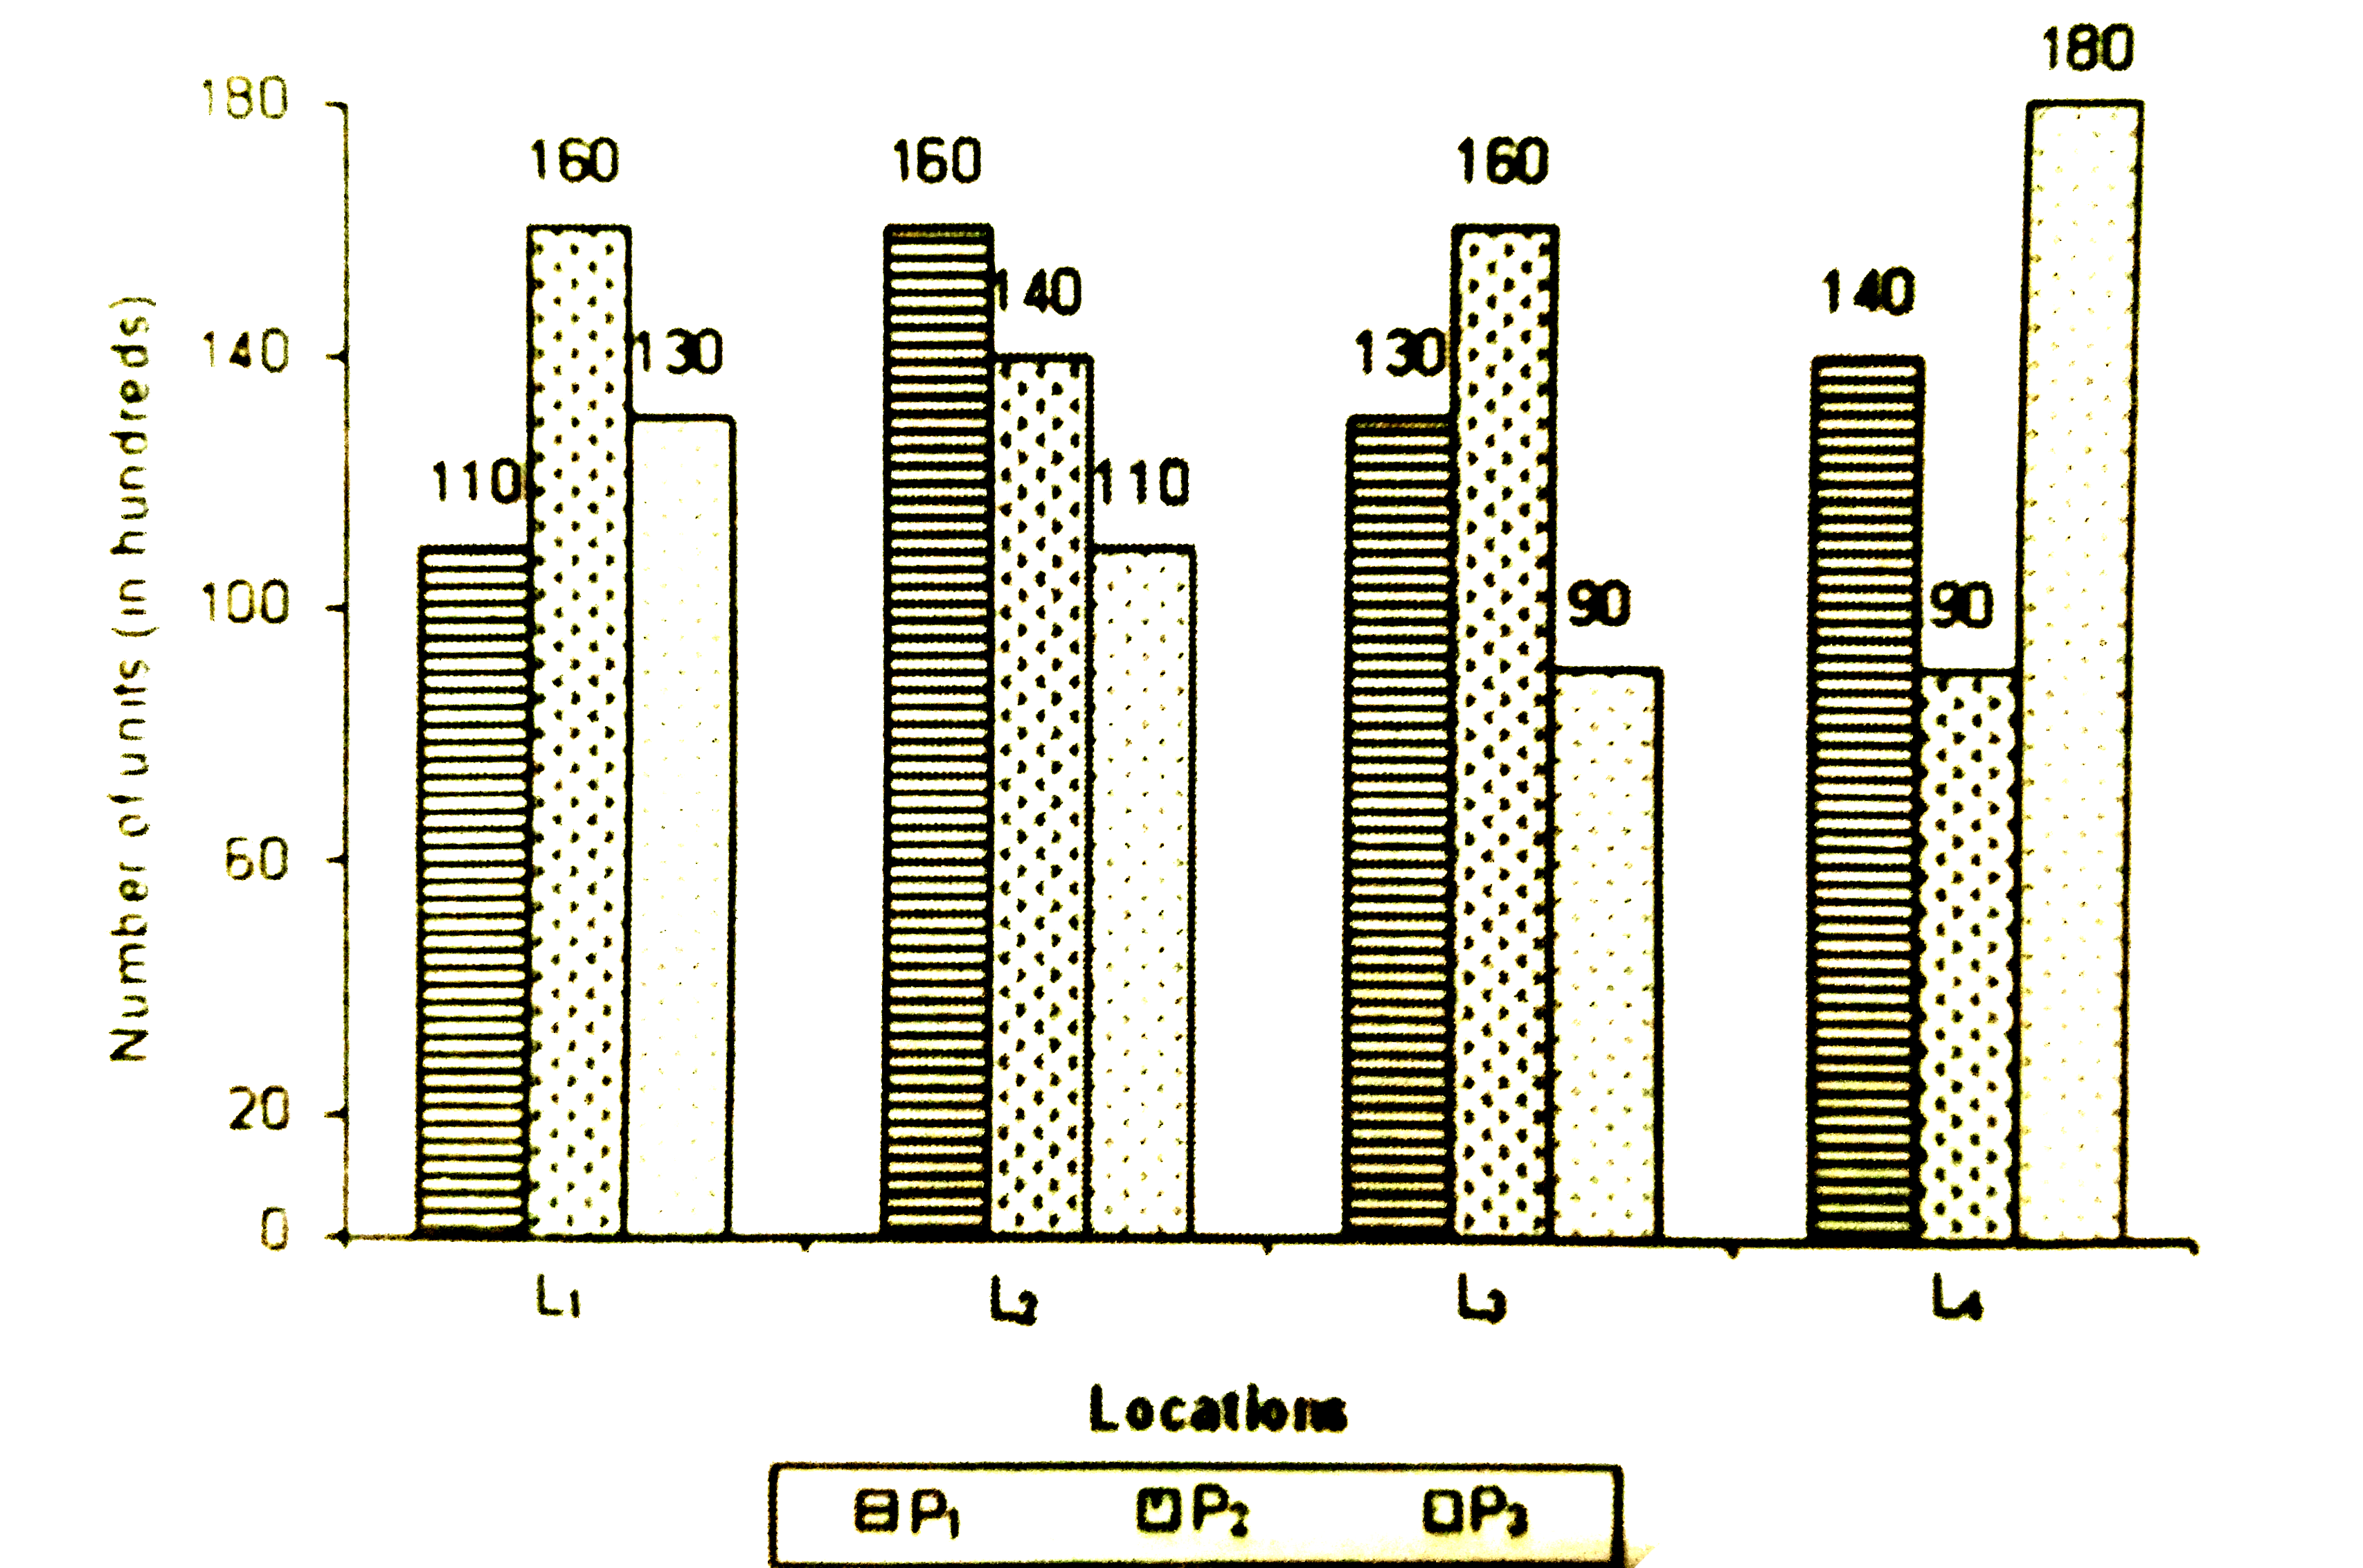 Number of units of three different products P(1),P(2) and P(3) produced (nits in hundreds) at four different locations (L(1),L(2)=L(3) and L(4))      By what approximate percent is the number of units of P1 poroduced more than the number of units of P3 produed in the four locations together ?